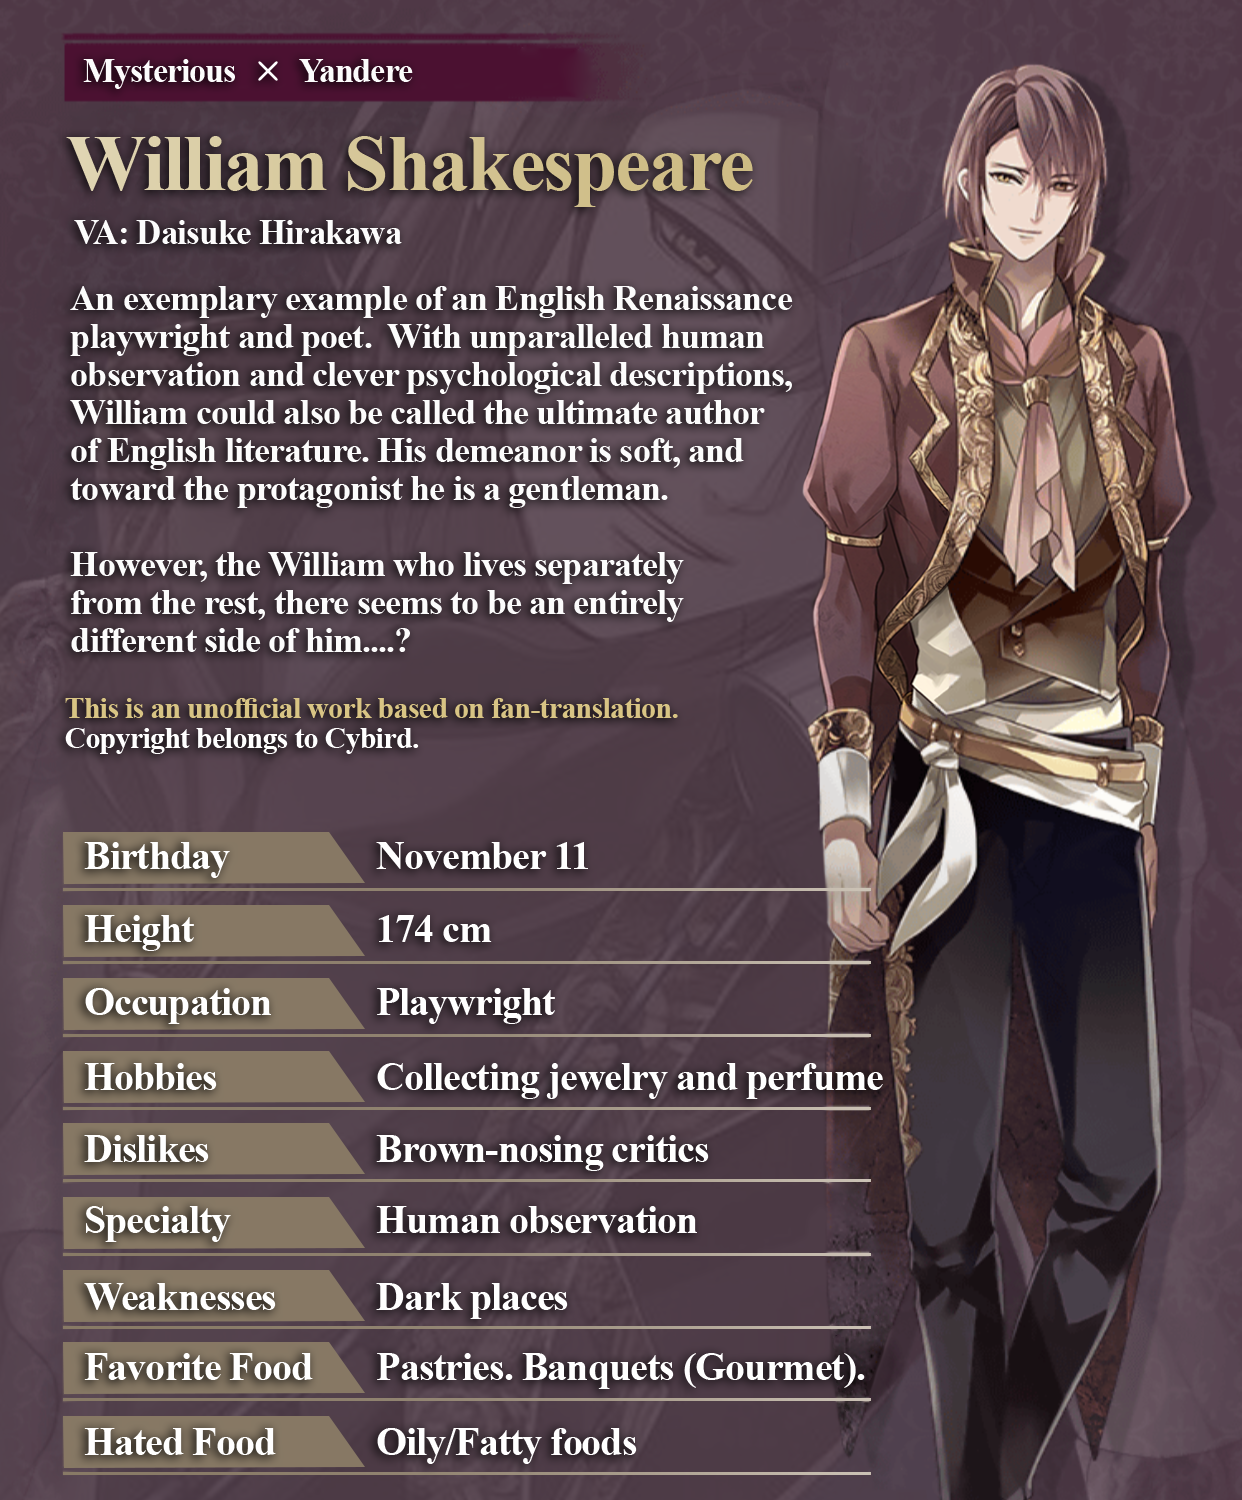 Y'all Thirsty — ikevampeventarchive: William Shakespeare Profile...